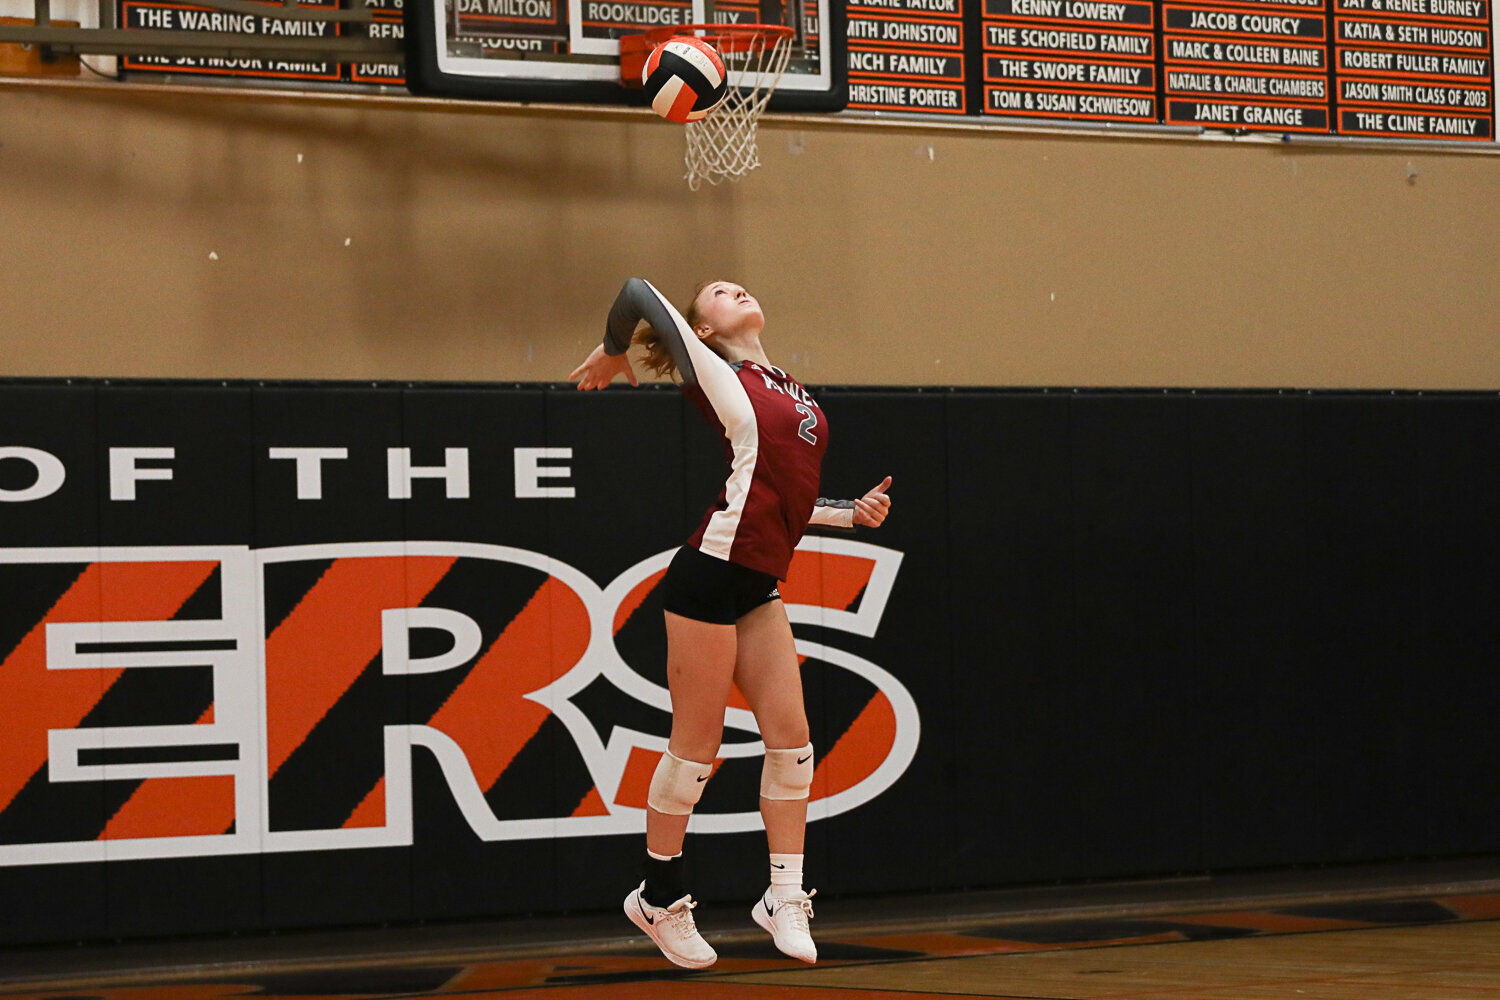 Chloe Chloupek serves the ball during the second set of W.F. West's three-set loss at Centralia on Sept. 21.